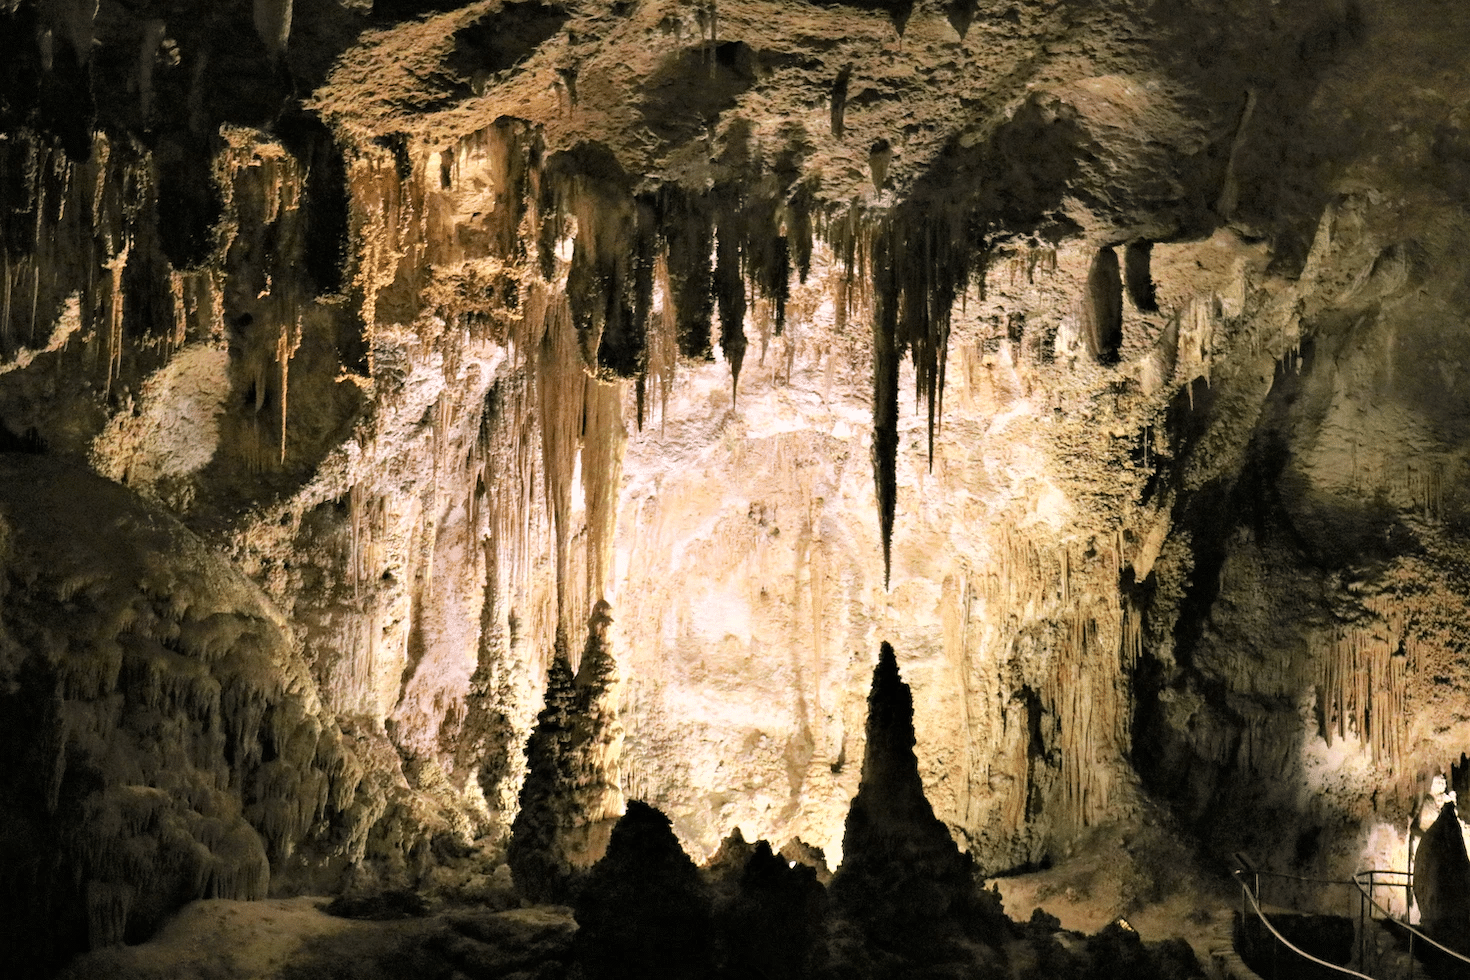 A cave in Carlsbad Caverns National Park